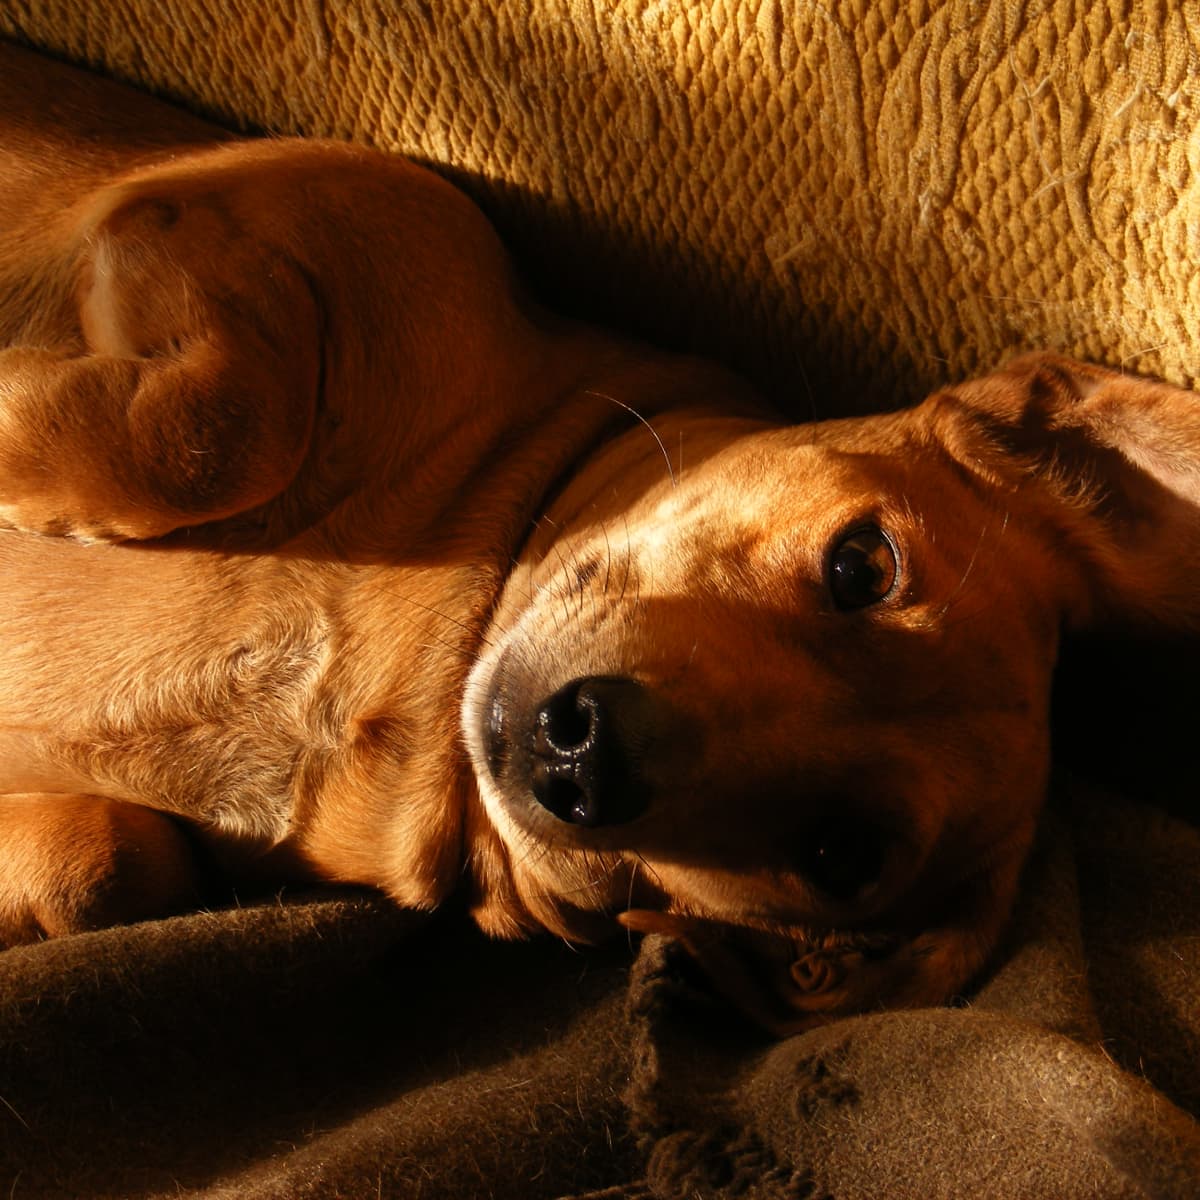 what causes gastroenteritis in dogs